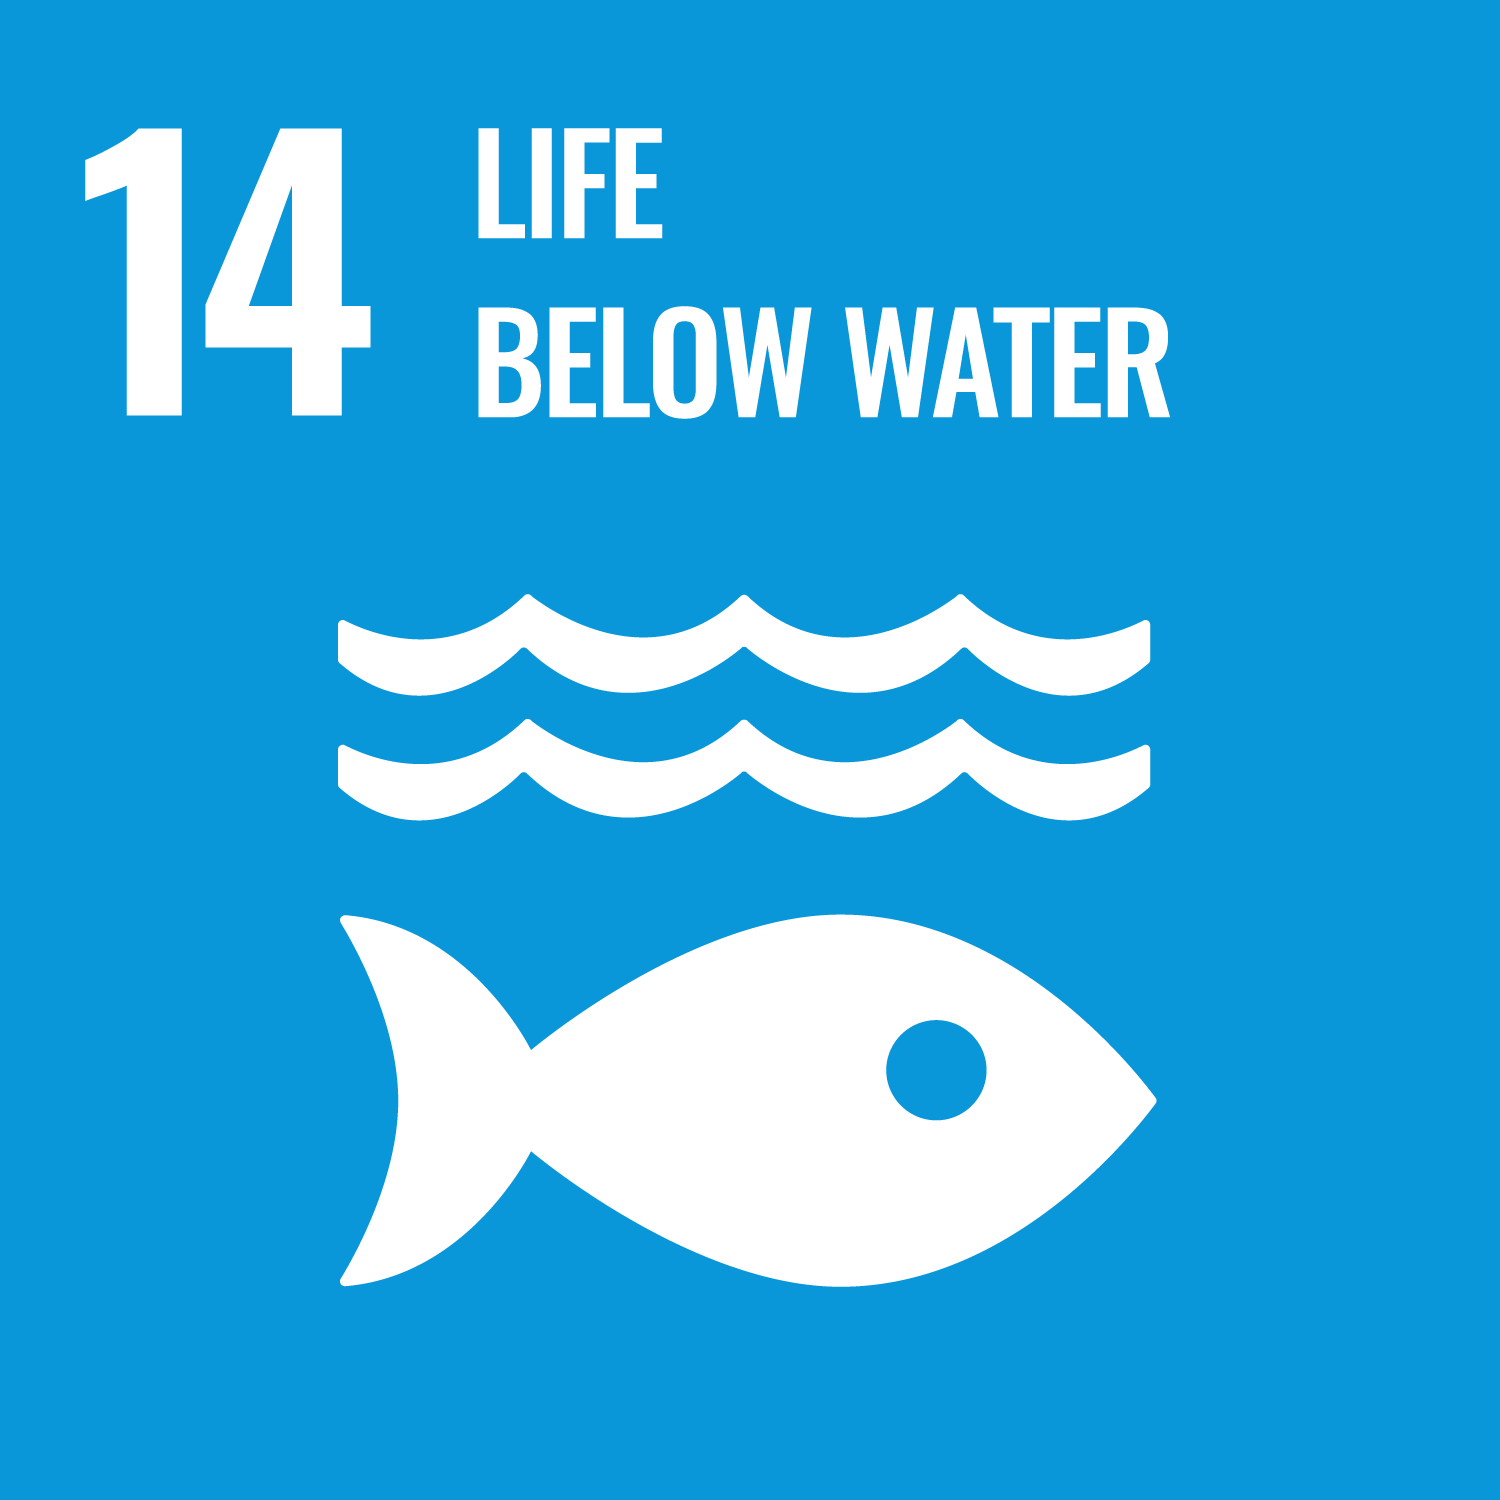 Sustainable Development Goal (SDG) number 14, depicted with a light blue square featuring a white symbol of fish and waves, the number '14,' and the description 'life below water' in white letters